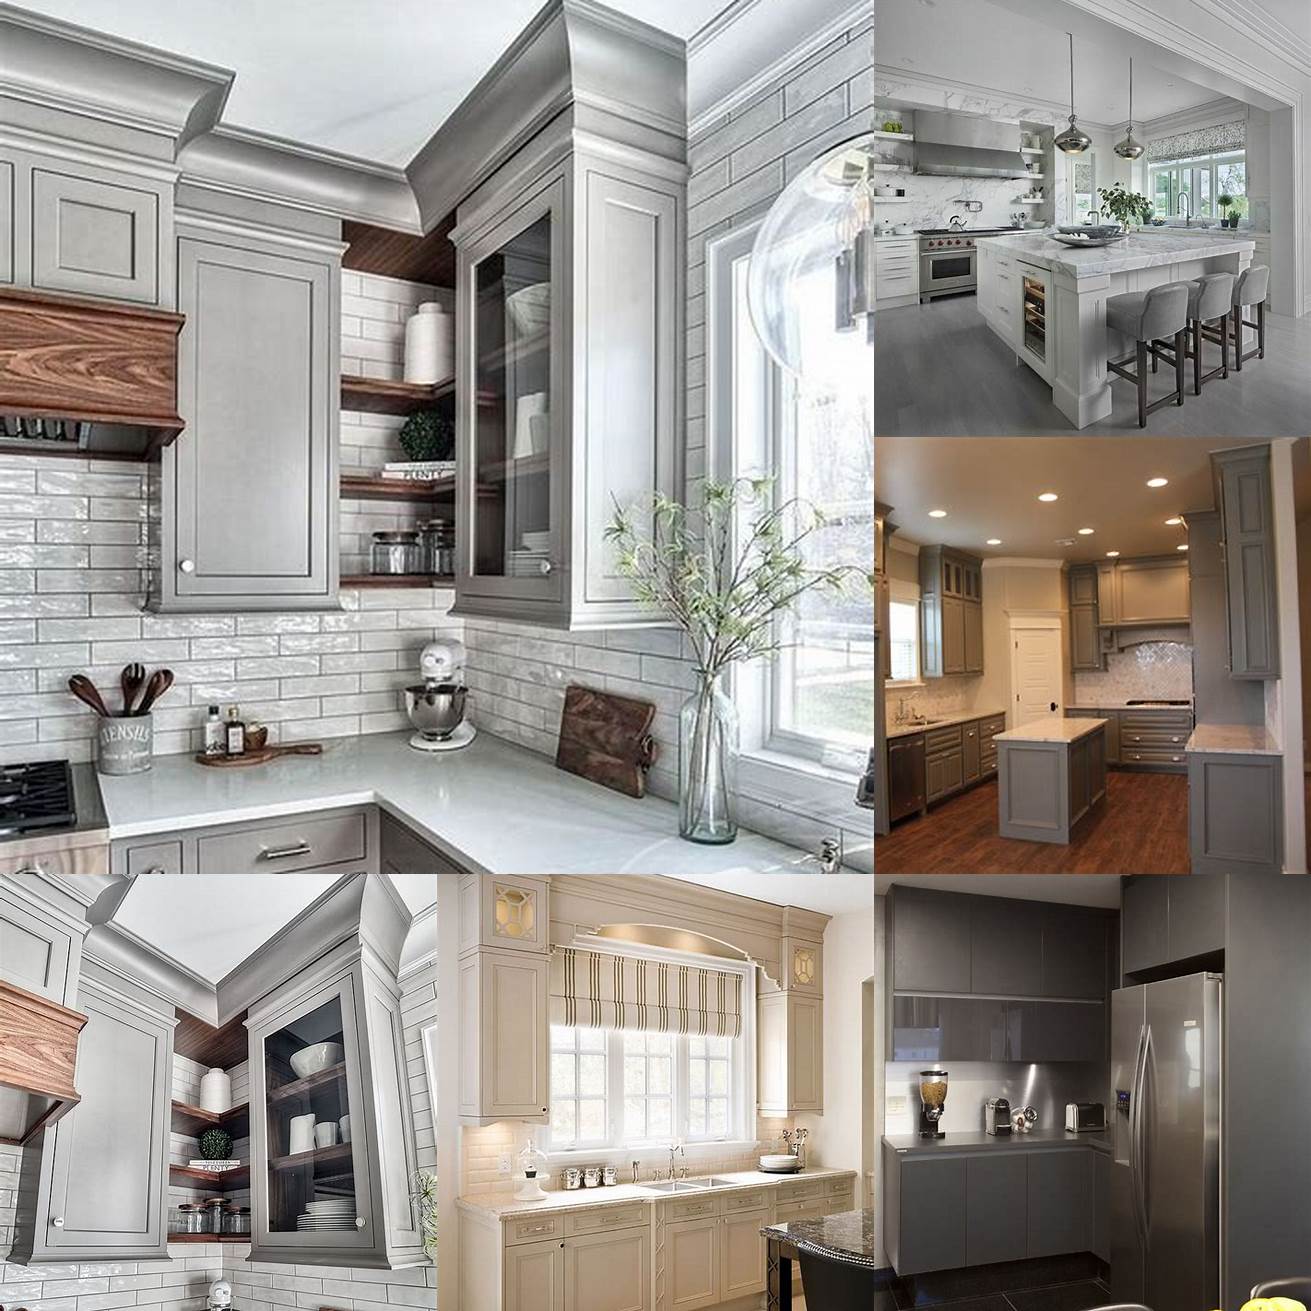 Neutral colors such as beige or gray add a sophisticated and elegant touch to your kitchen